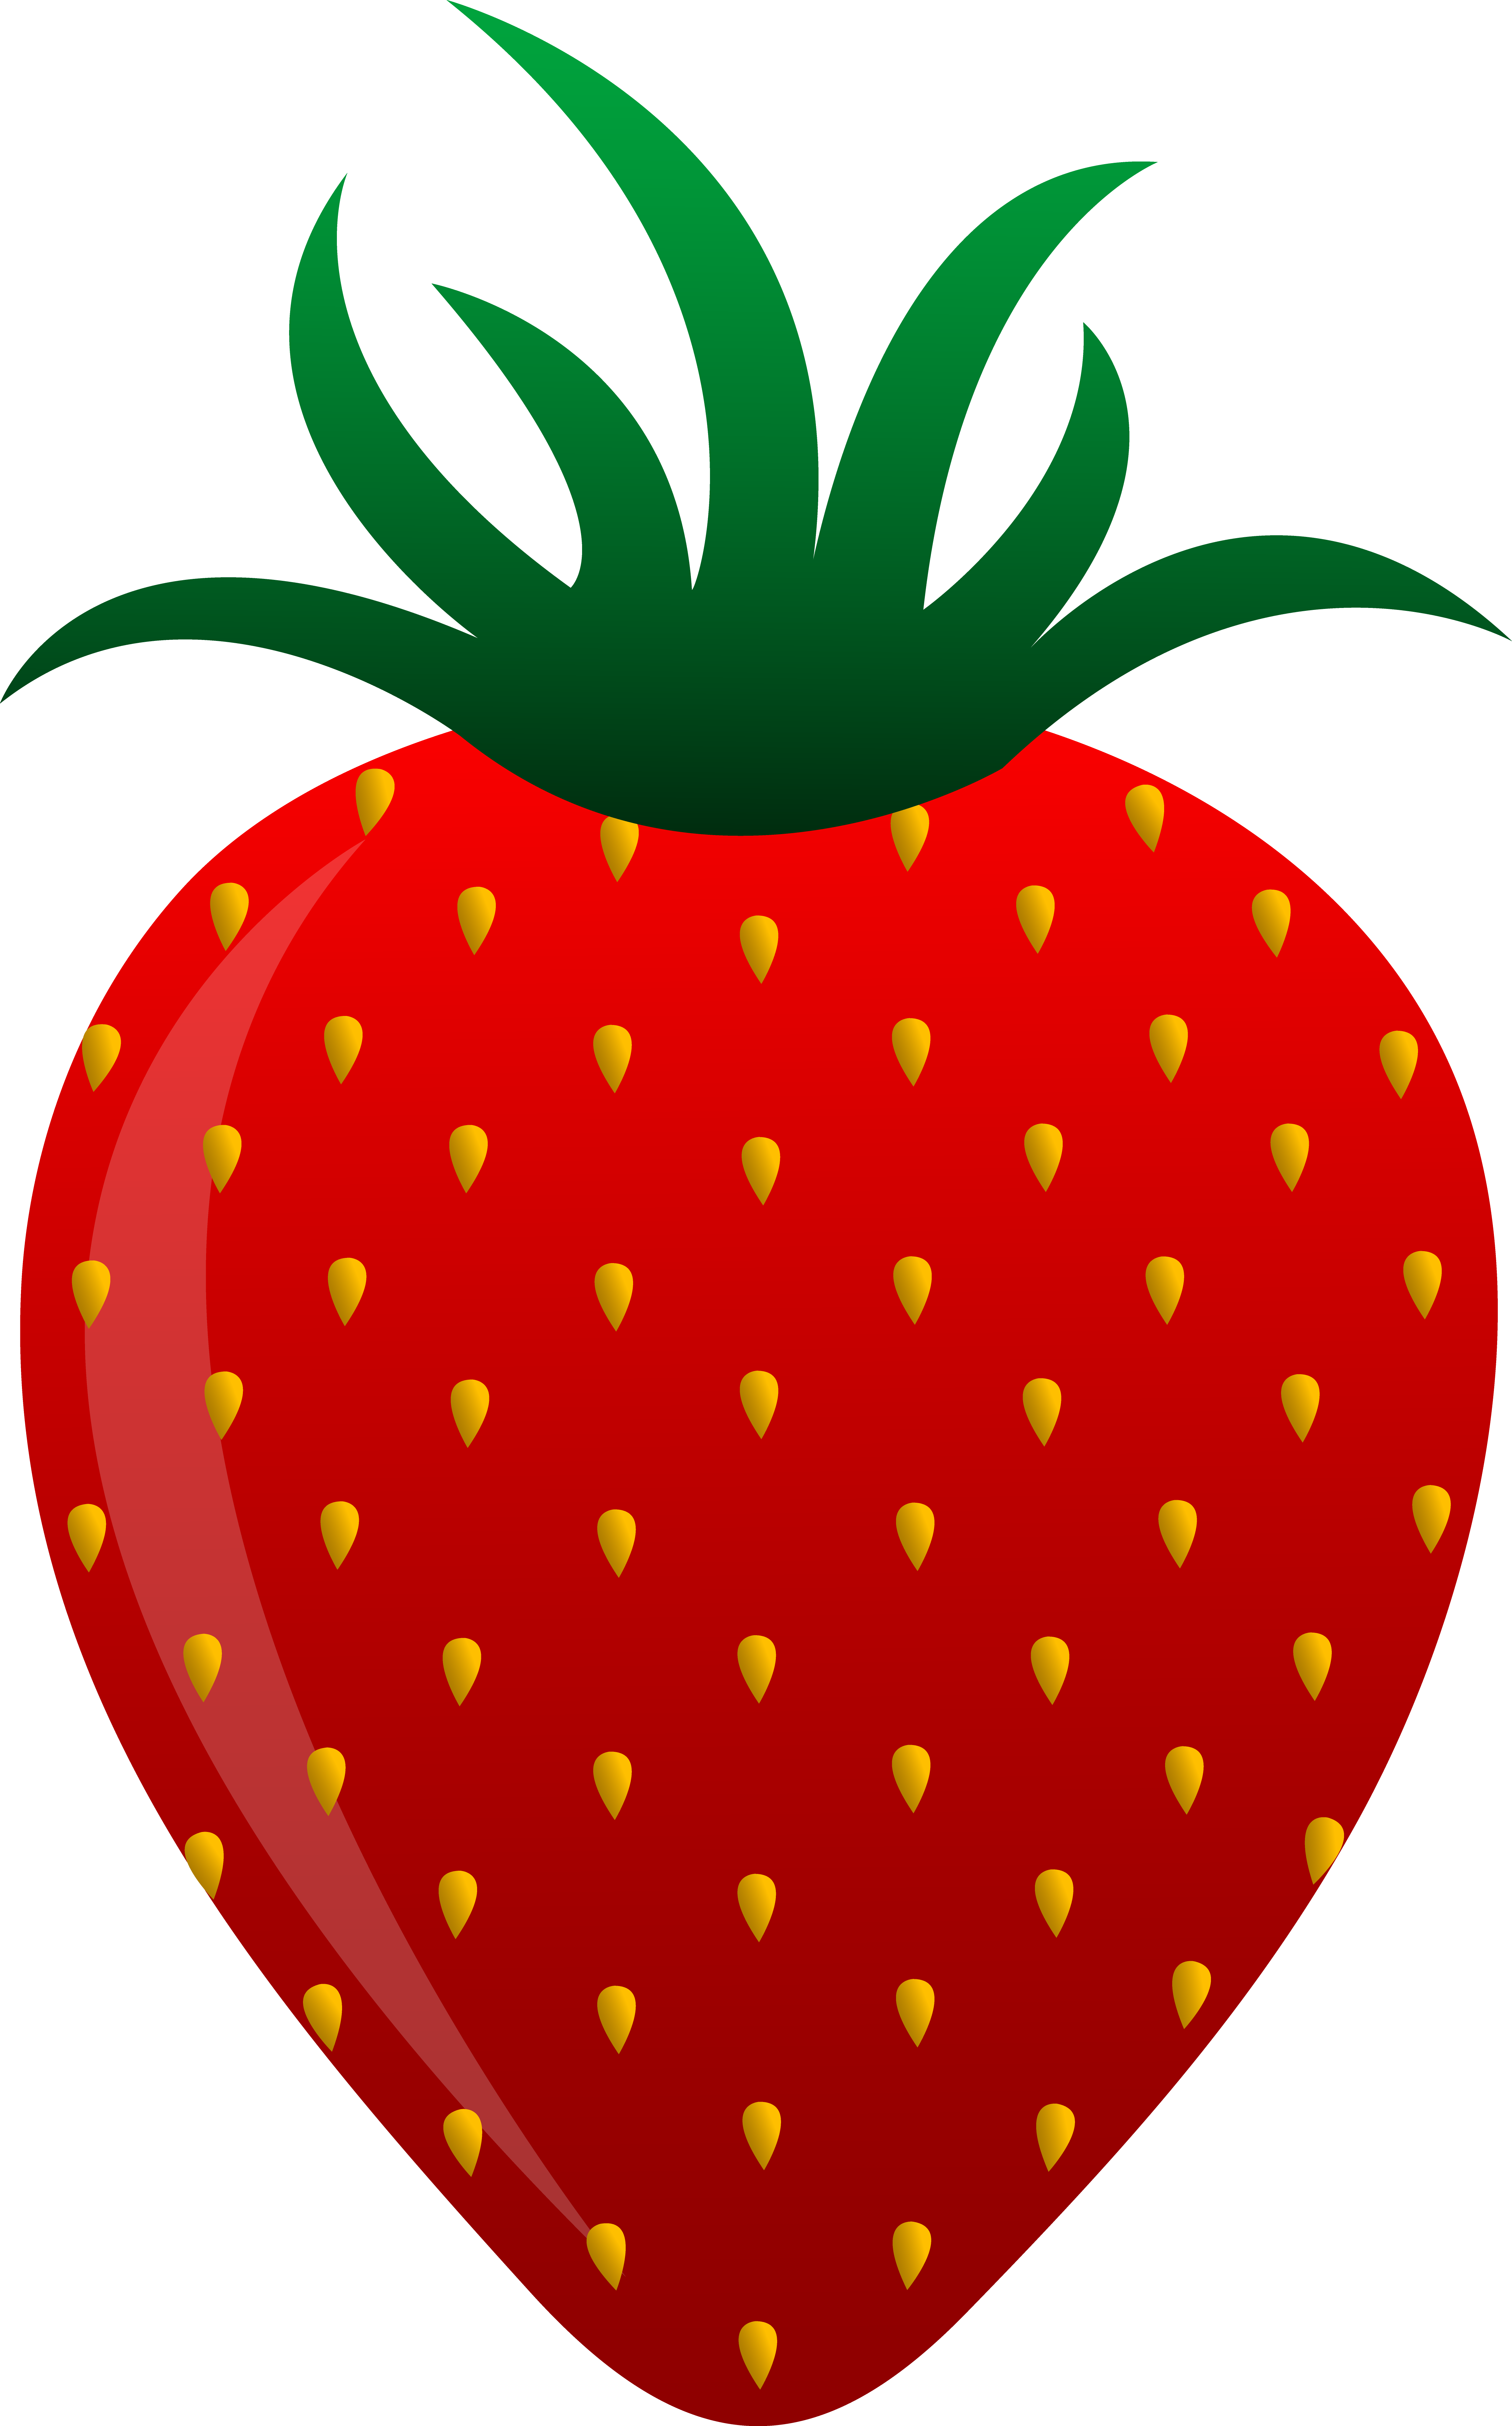 foods clipart strawberry